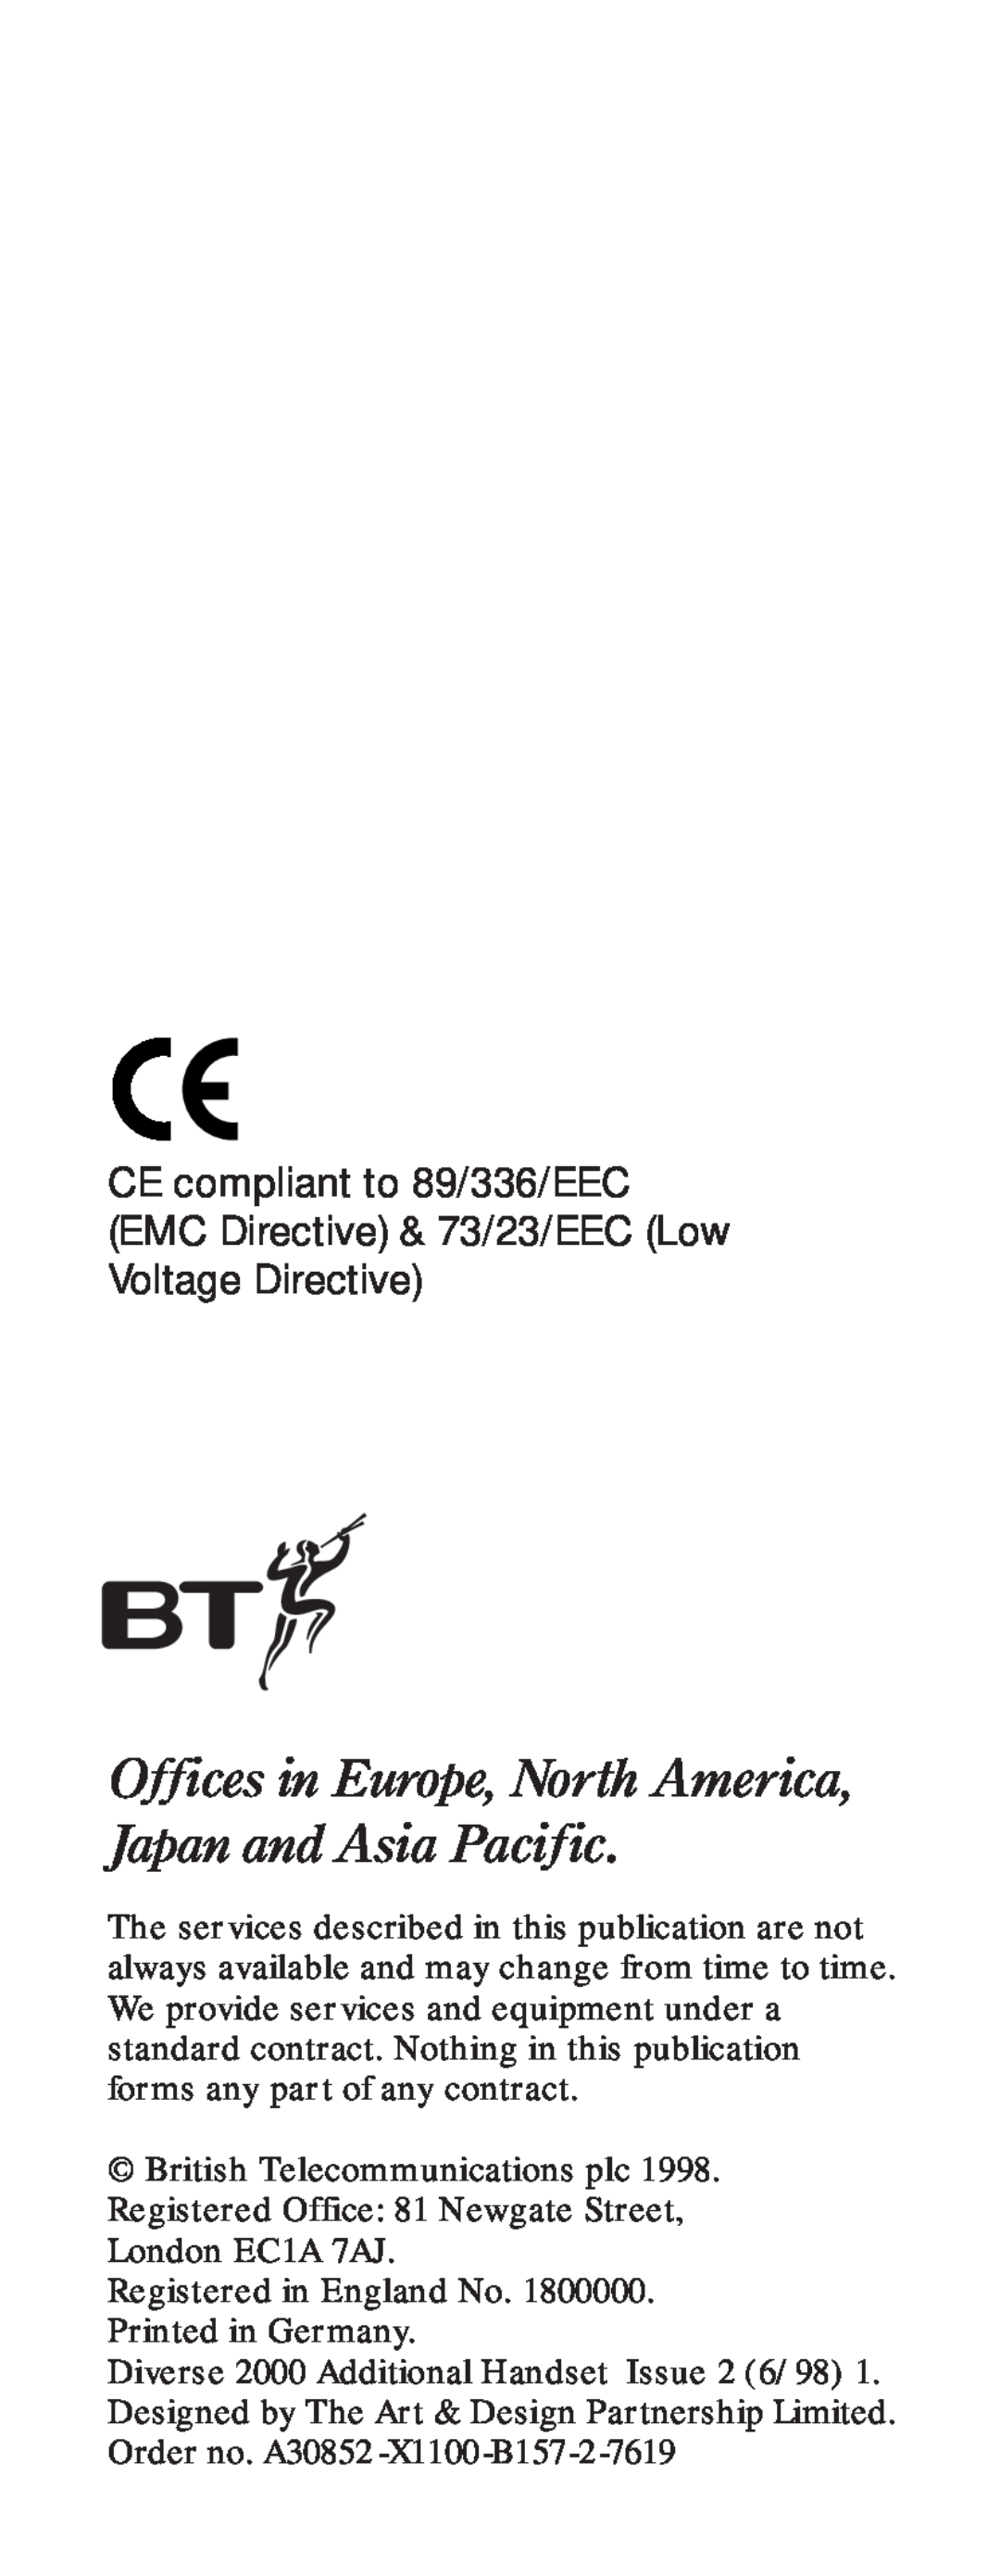 BT 2000 user manual Offices in Europe, North America, Japan and Asia Pacific 